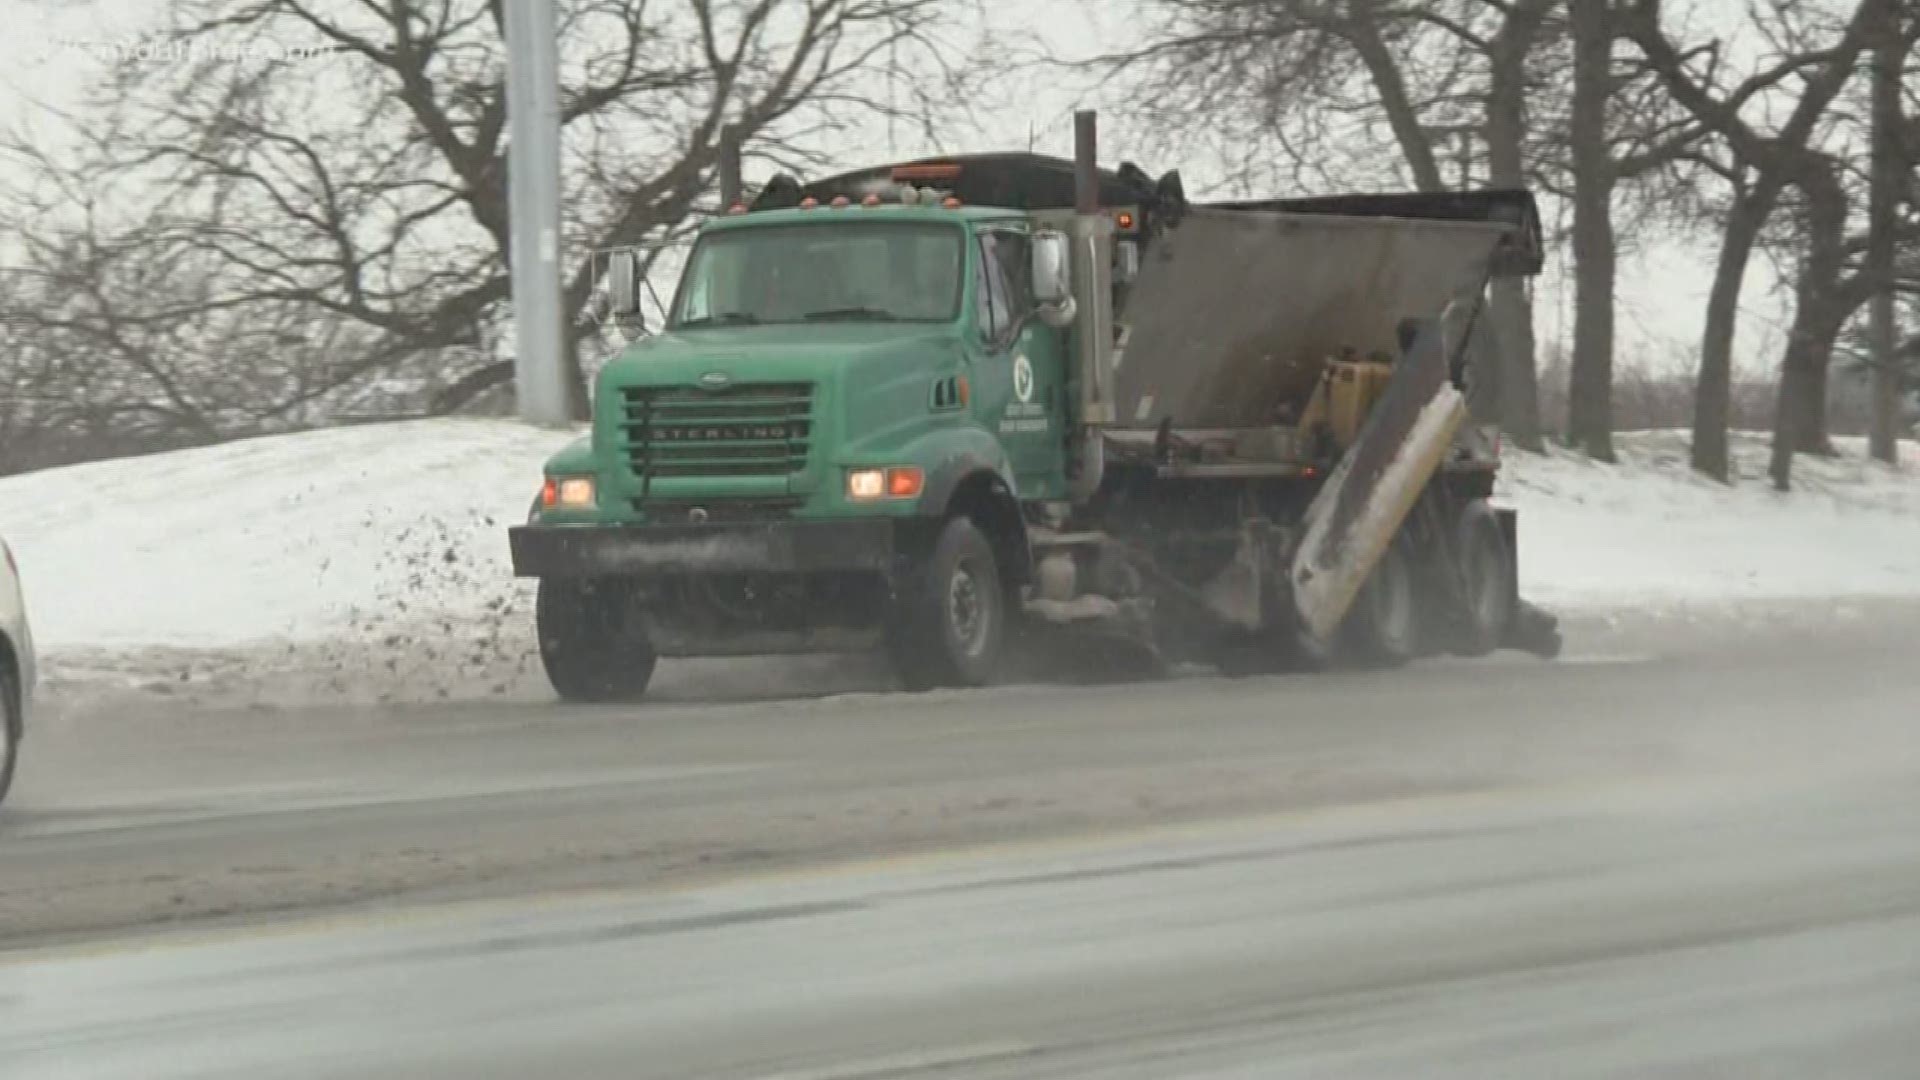 Take the roads snow Tuesday as crews still try to clear and treat the roadways with salt and sand.